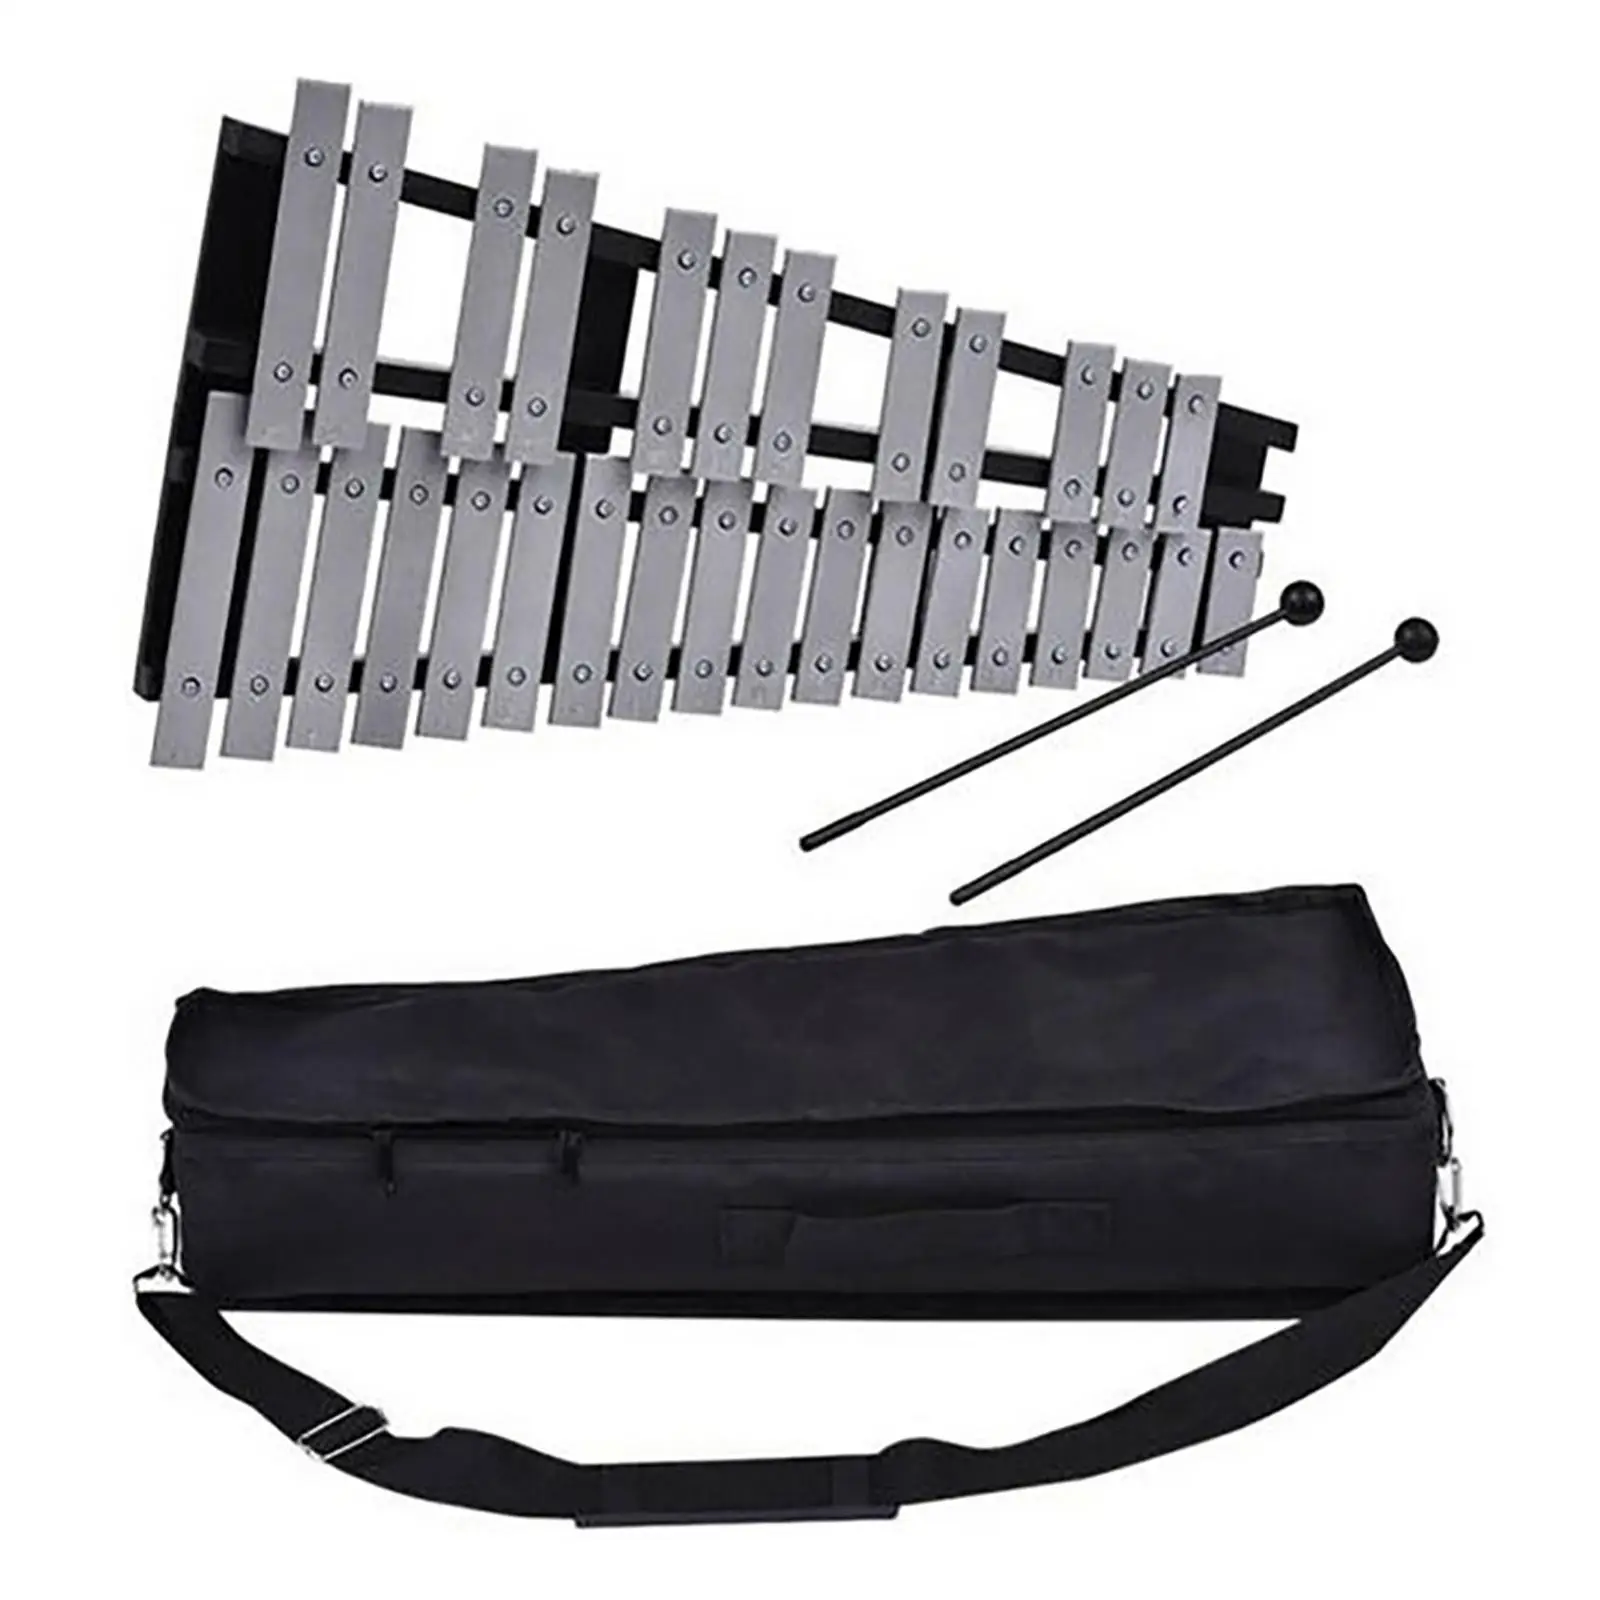 Metal 32 Note Glockenspiel Xylophone Bell Percussion Instrument Kit and Carrying Bag Includes 2 Mallets for Birthday Gift